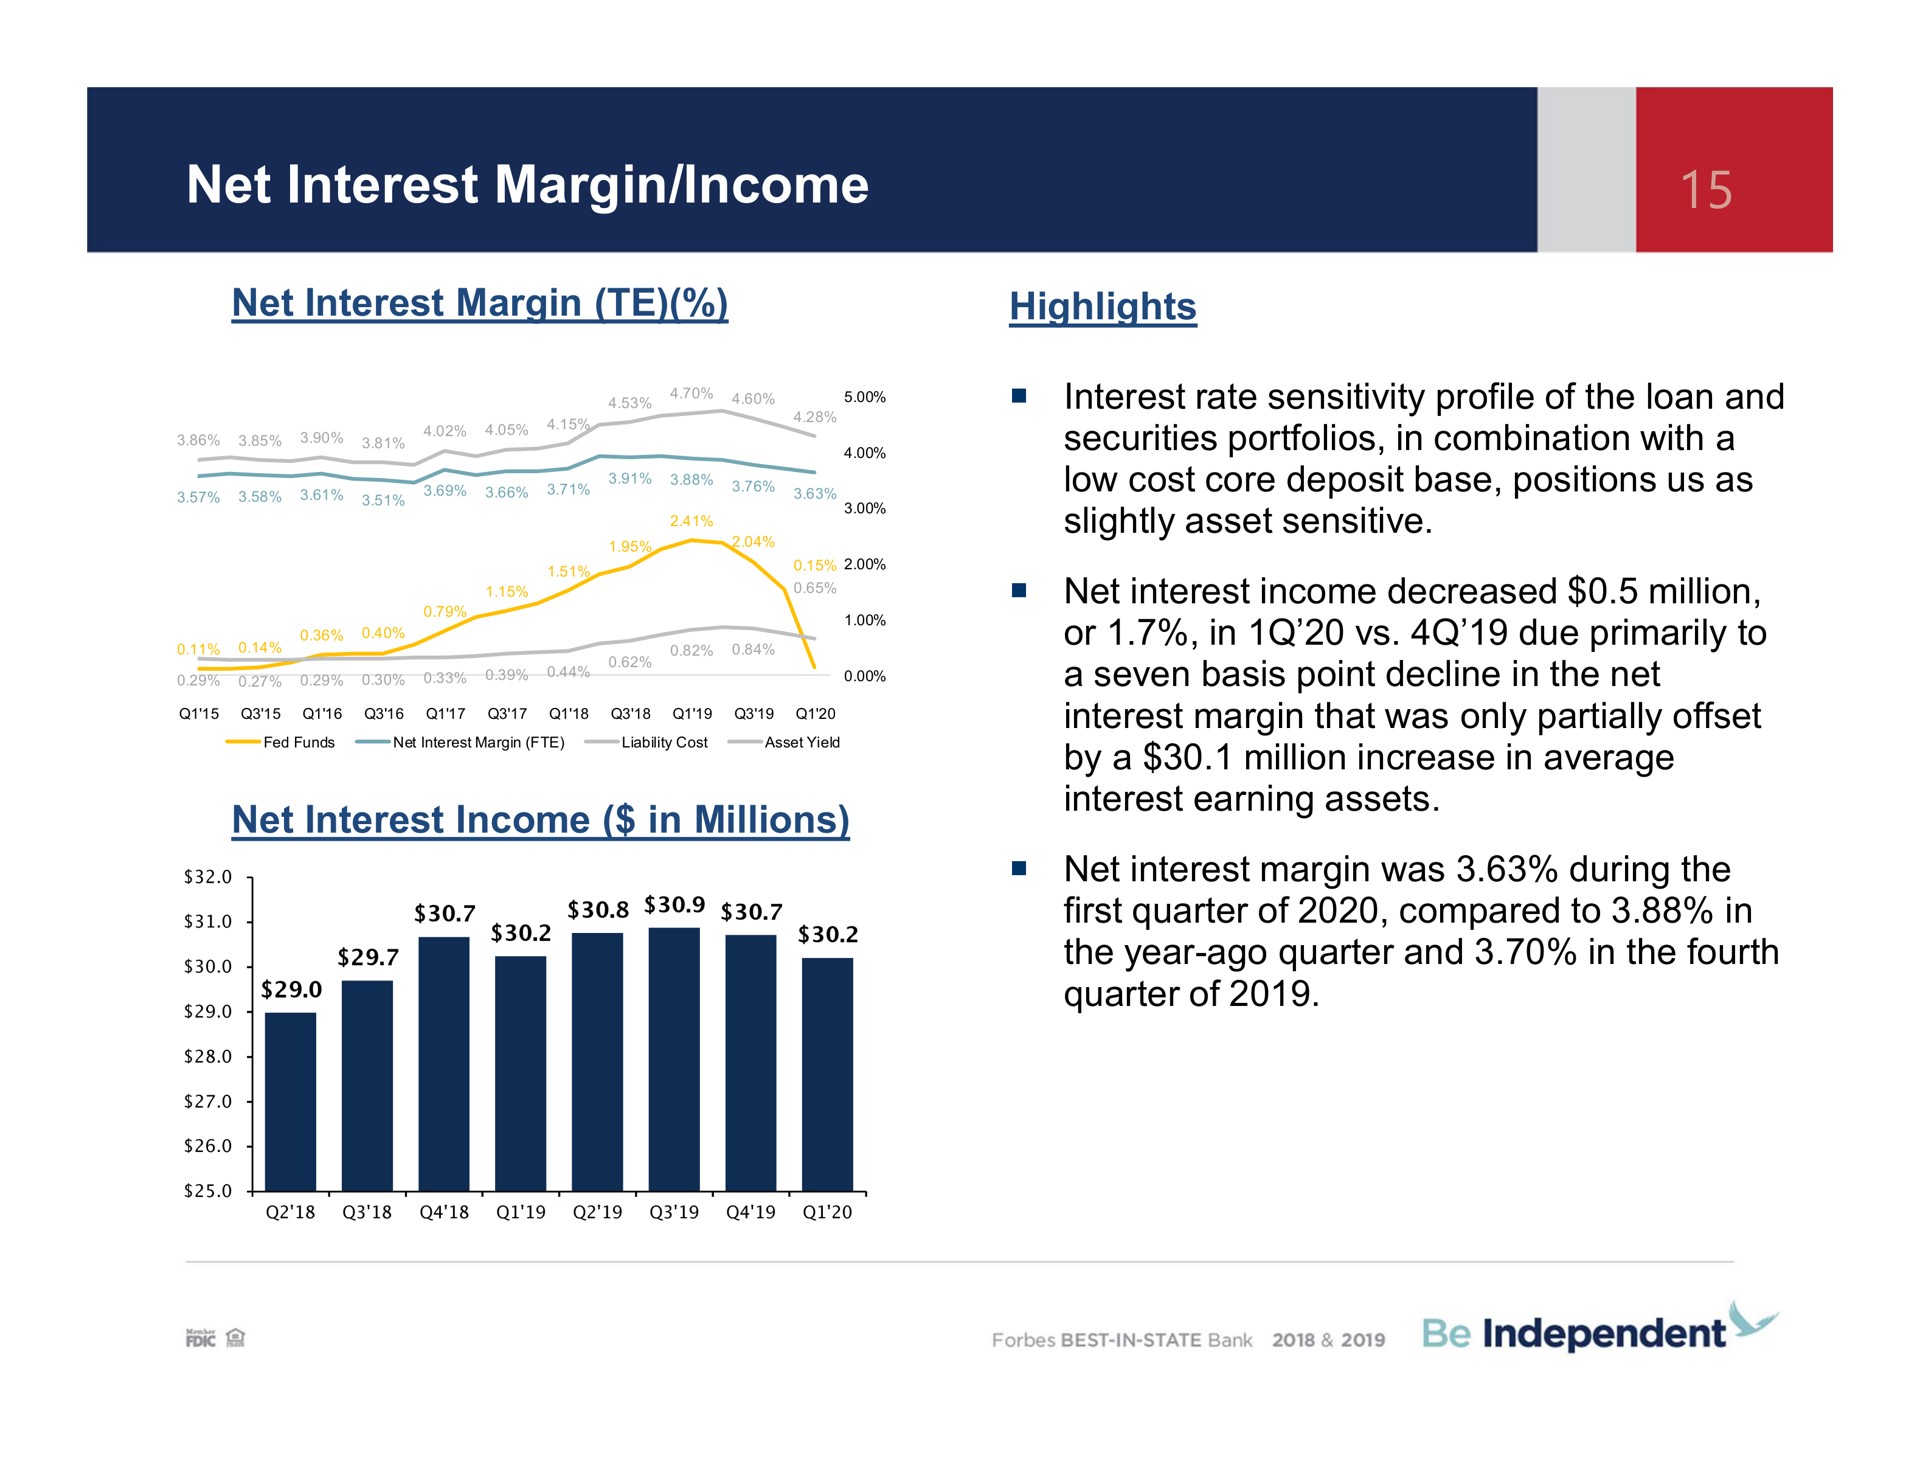 net interest margin income net interest margin highlights net interest income in millions by a million increase average independent | Independent Bank Corp